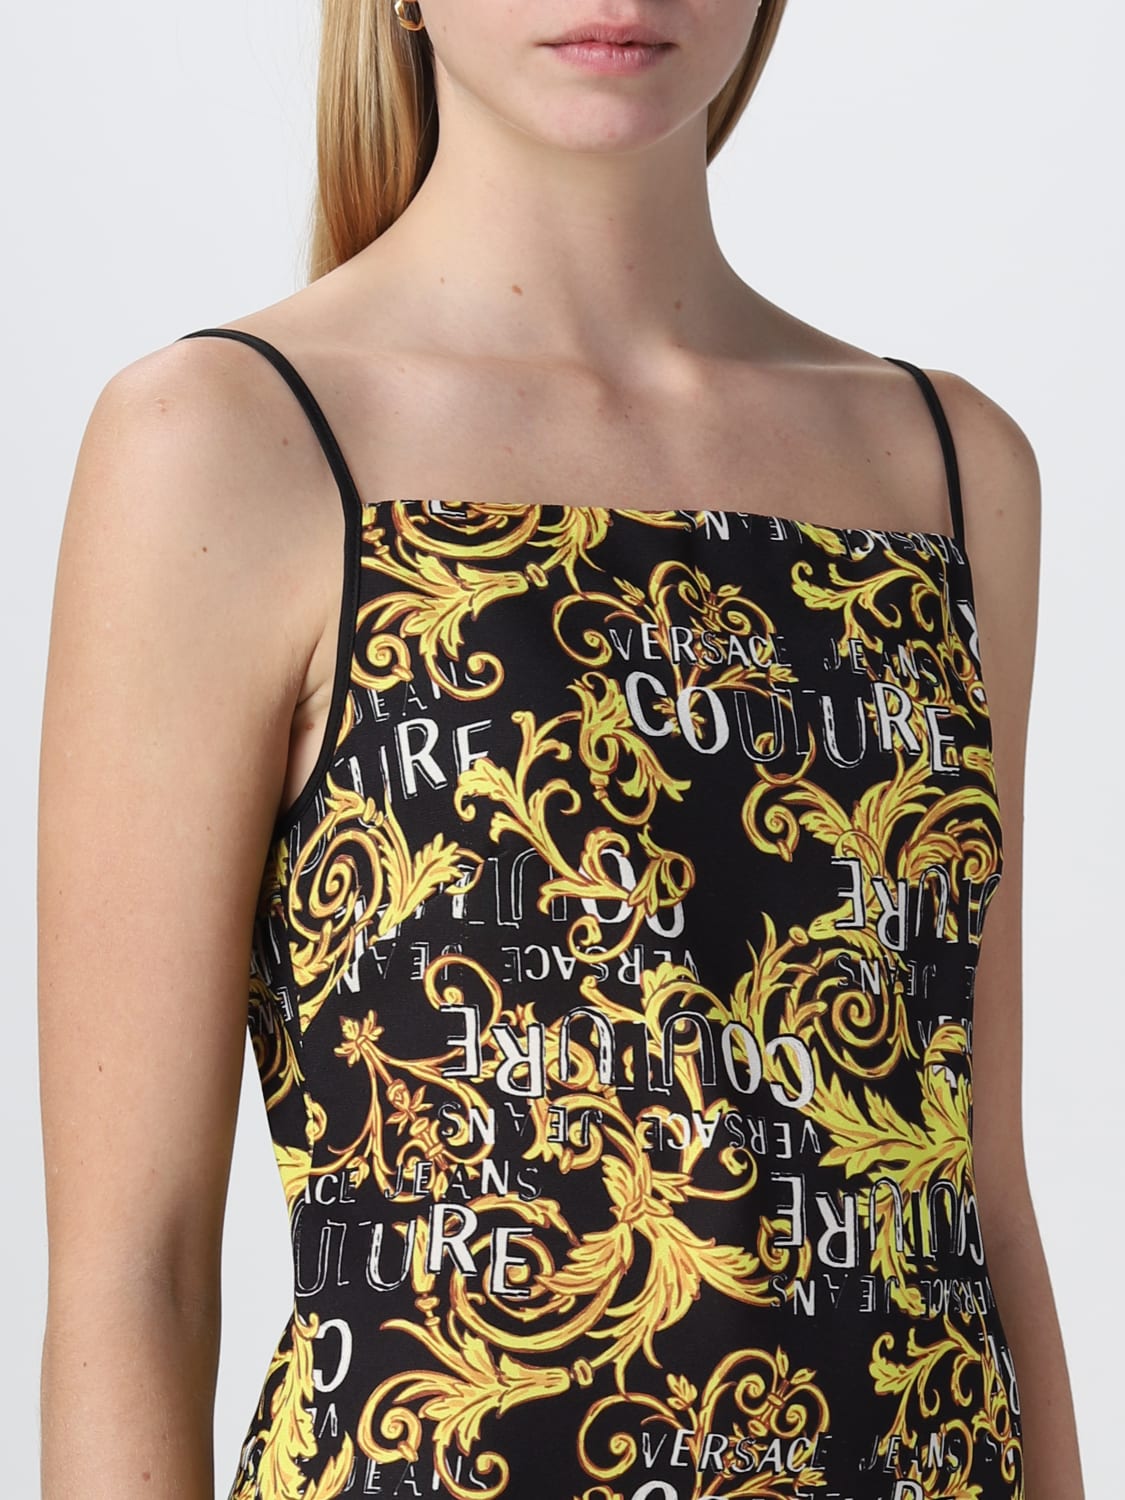 Versace Jeans Couture Outlet: women's dress in synthetic fabric